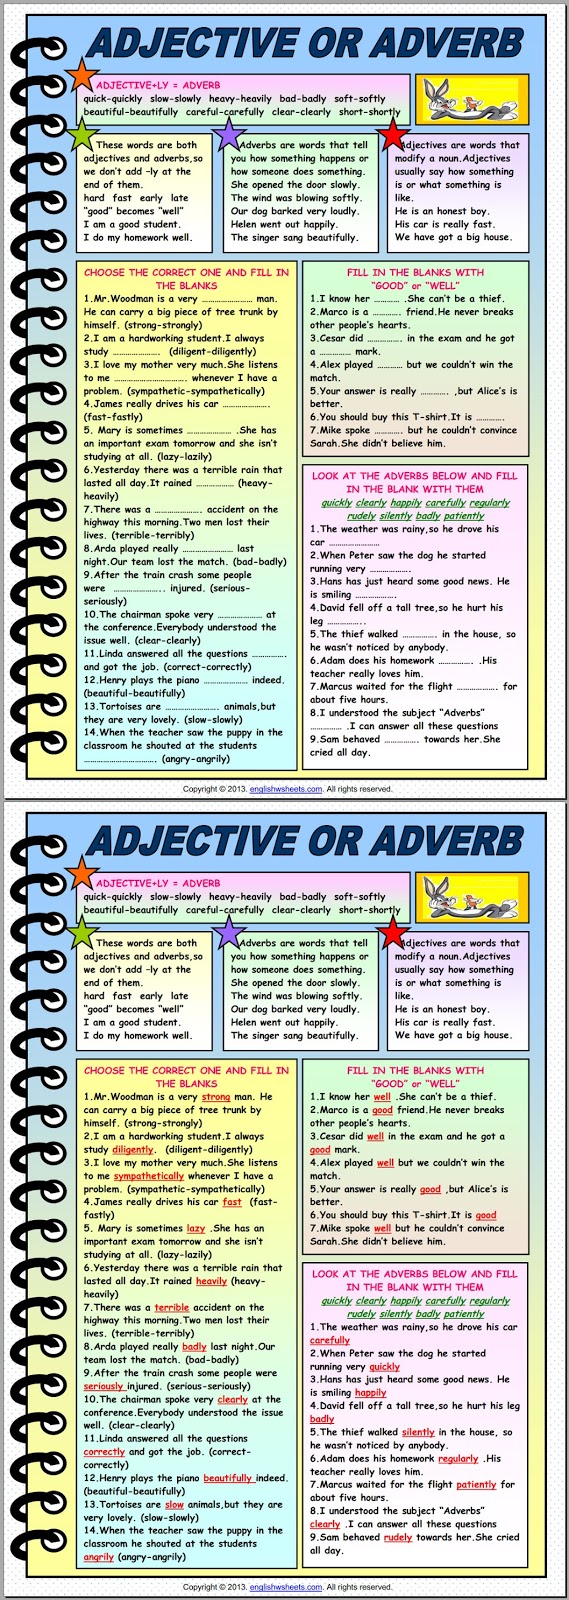 adjective-or-adverb